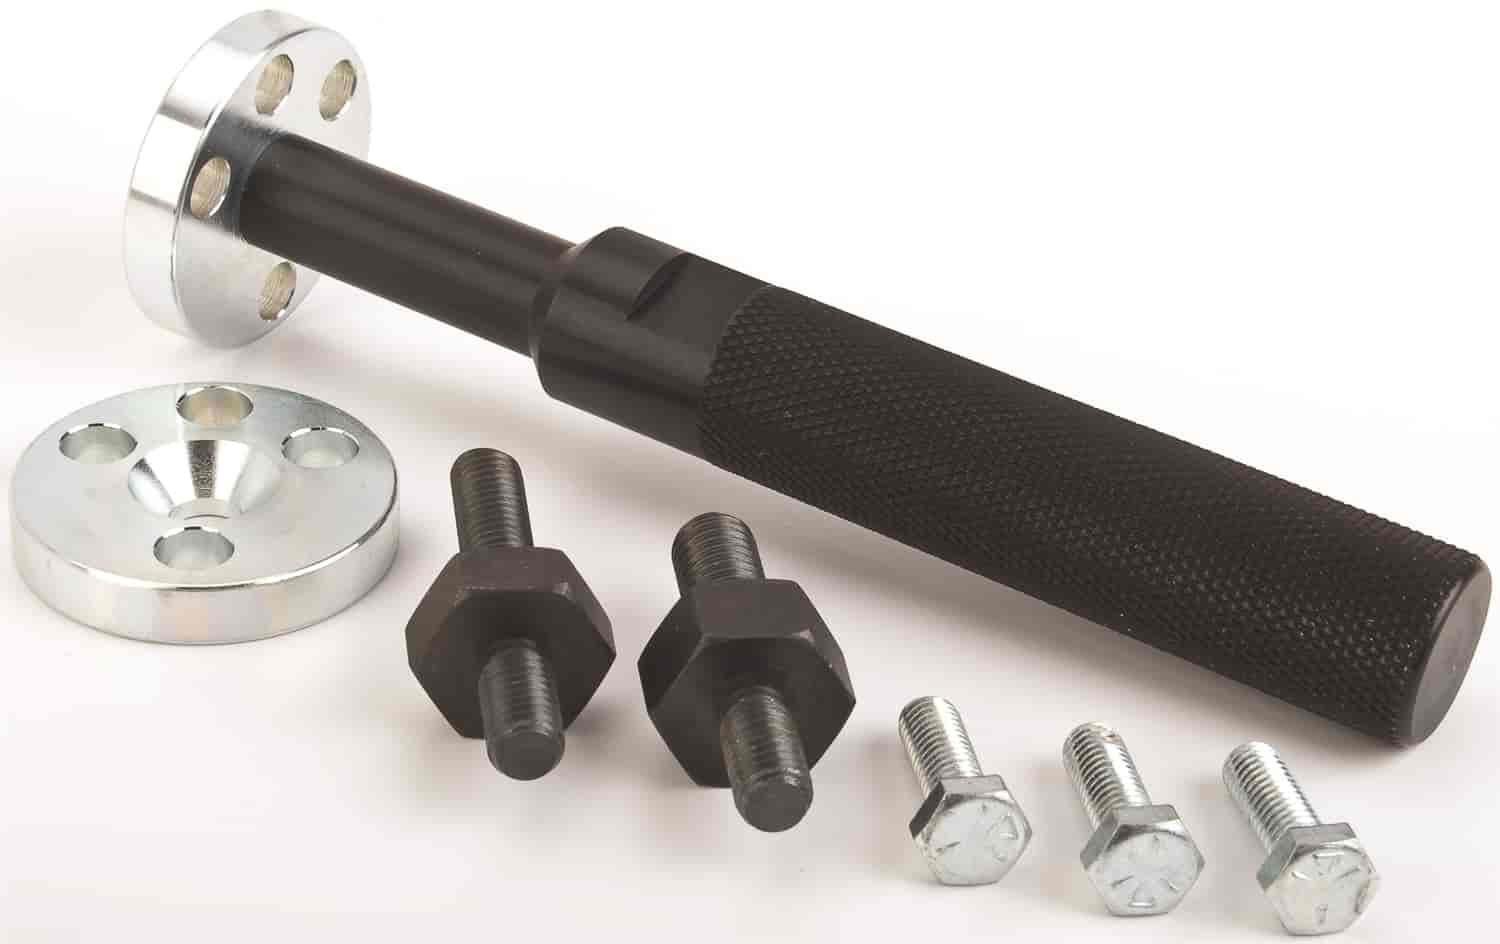 Universal Camshaft Installation/Removal Tool Includes 4 camshaft adapters